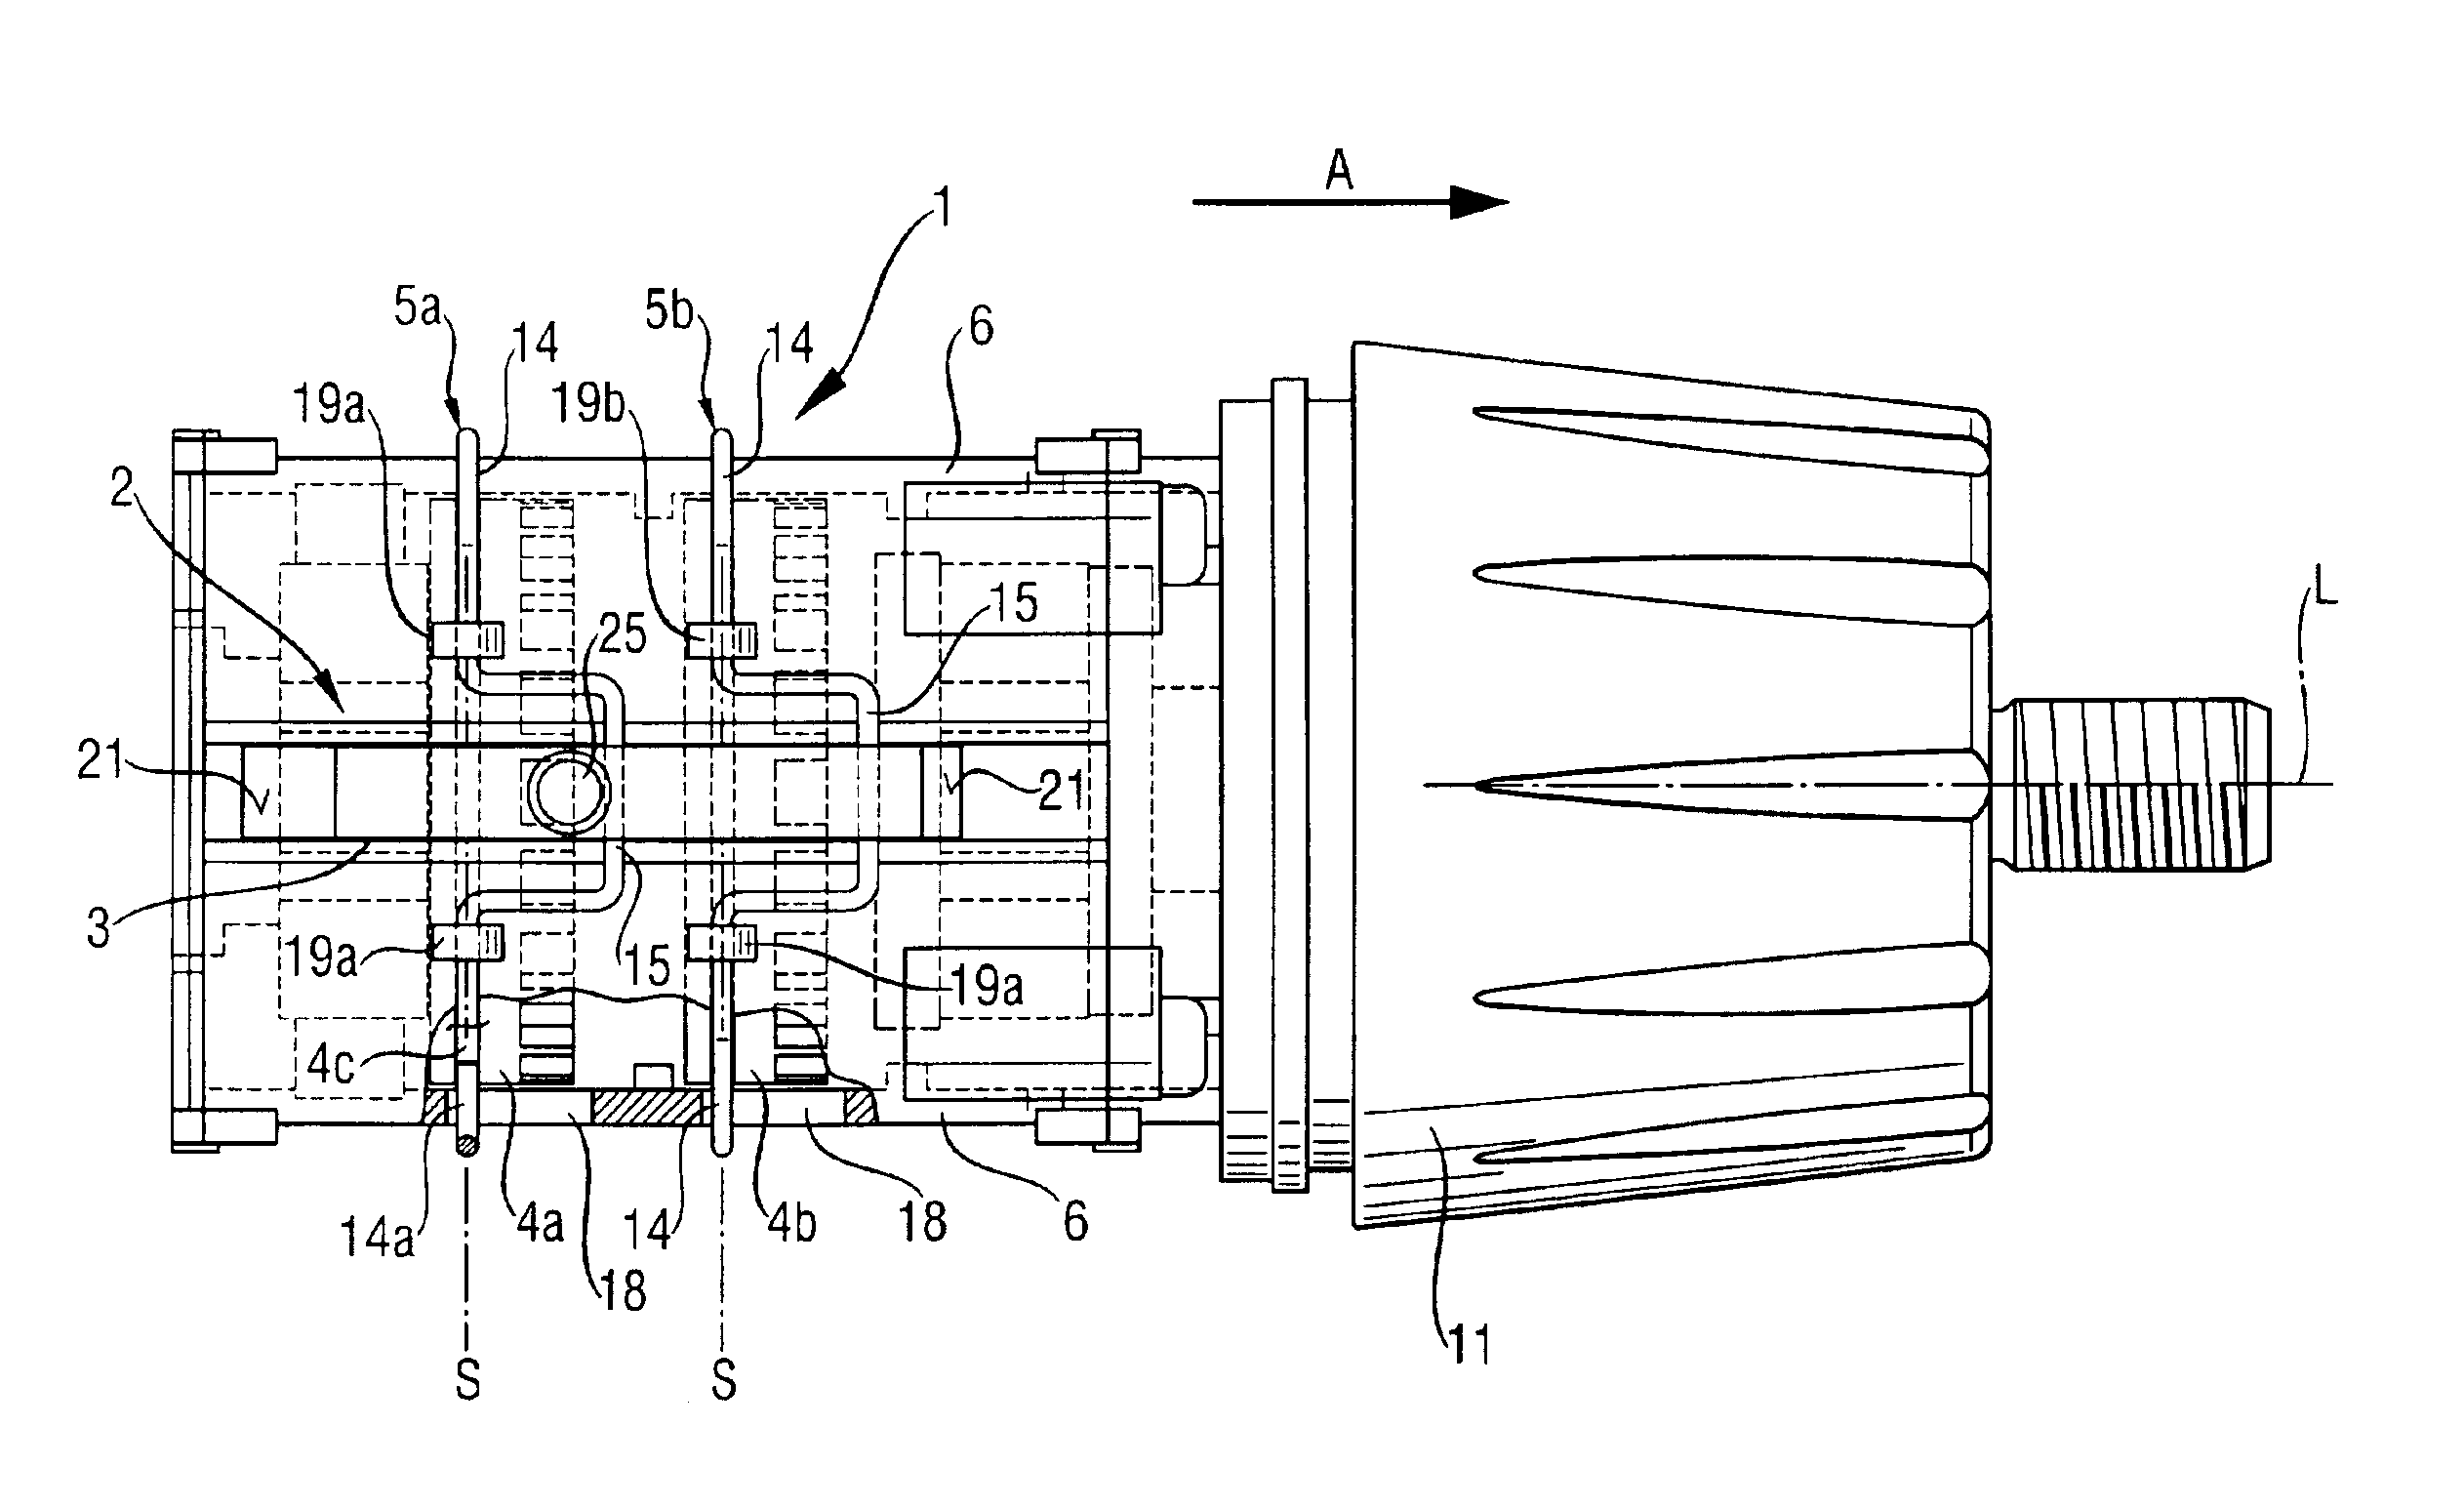 Gear transmission assembly for electrical power tool